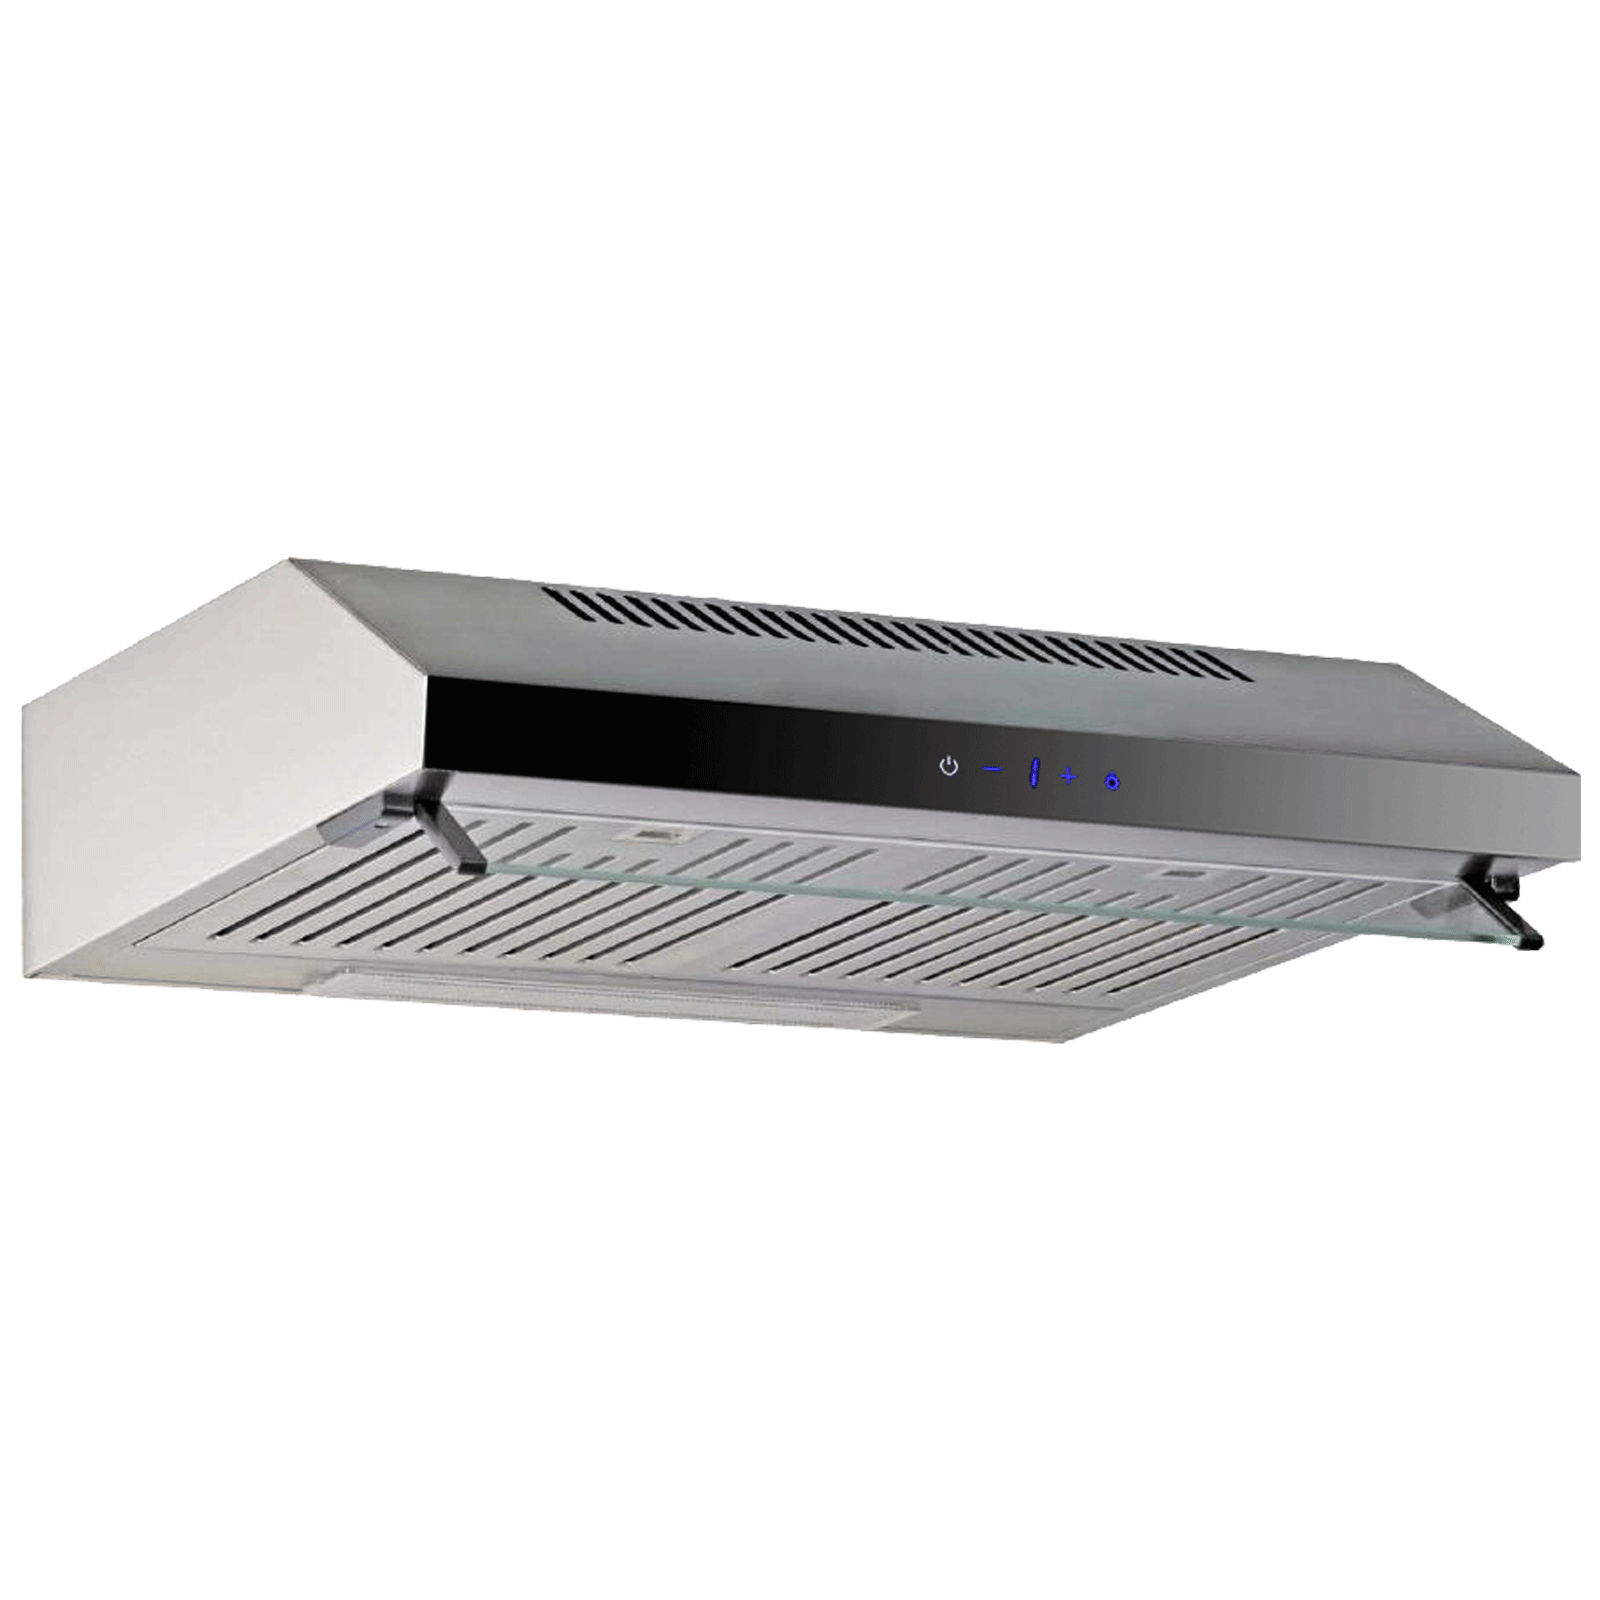 Faber Ruby XL TC SS 60 700 m³/hr 60cm Wall Mount Chimney (Baffle Filter, 300.0625.559, Stainless Steel)